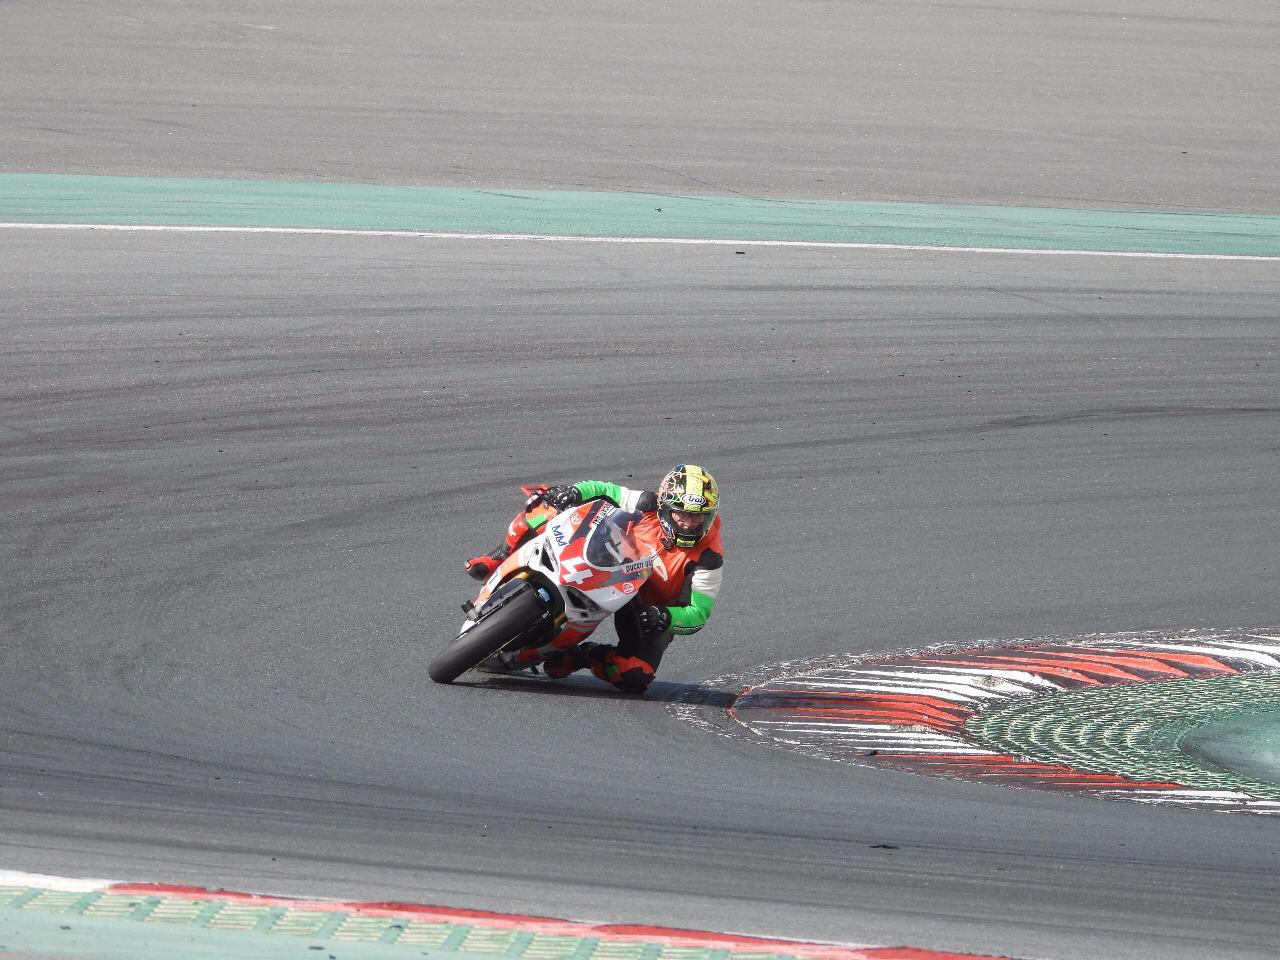 First-ever Al Masaood National Motorcycle Championship has officially kicked off at Dubai Autodrome Motor Sports Club